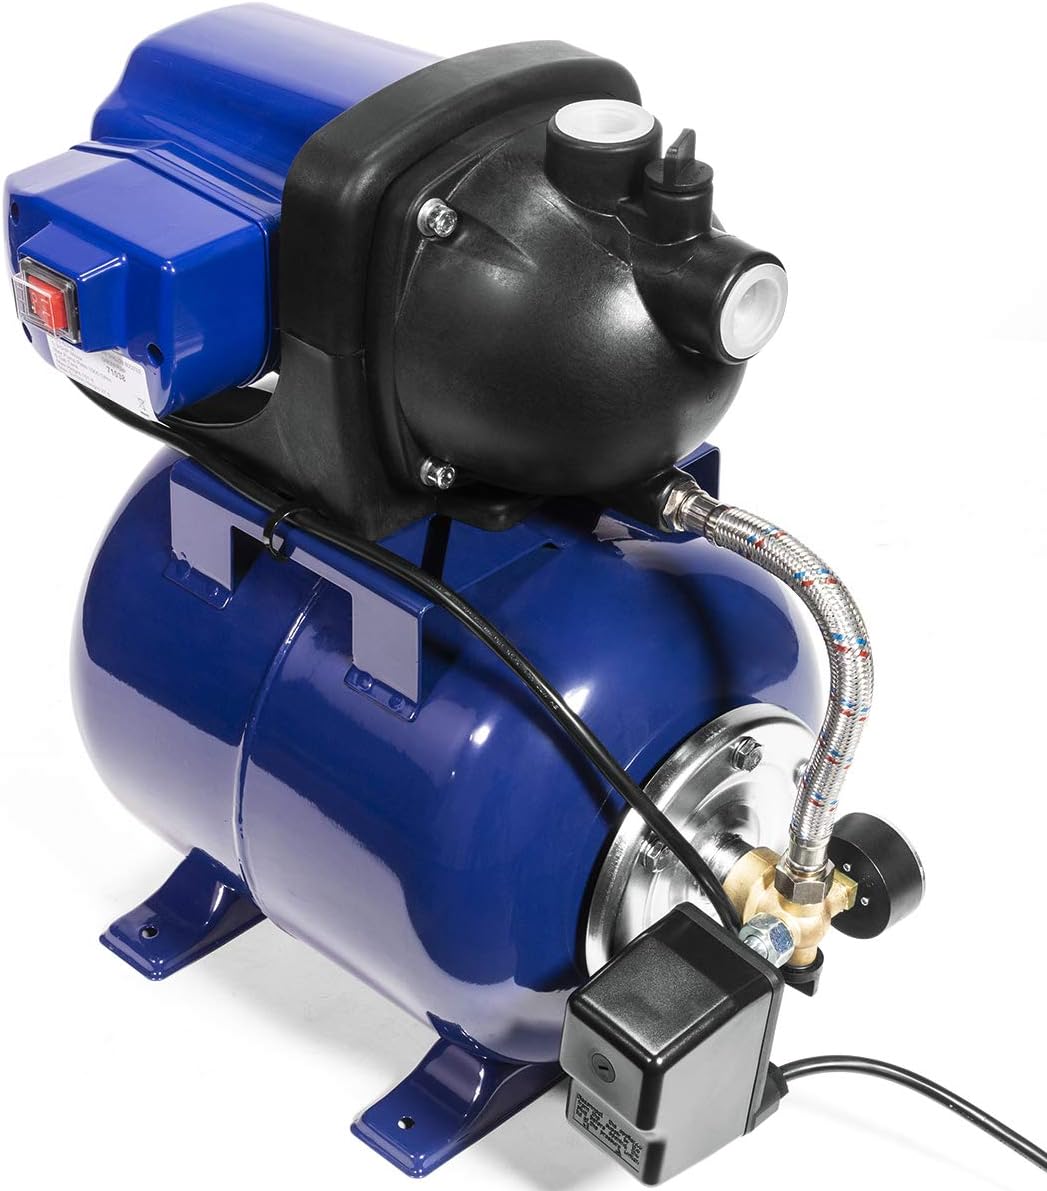 XtremepowerUS 1.6 HP Shallow Jet Water Well Pump with Tank Garden Sprinkler System, blue